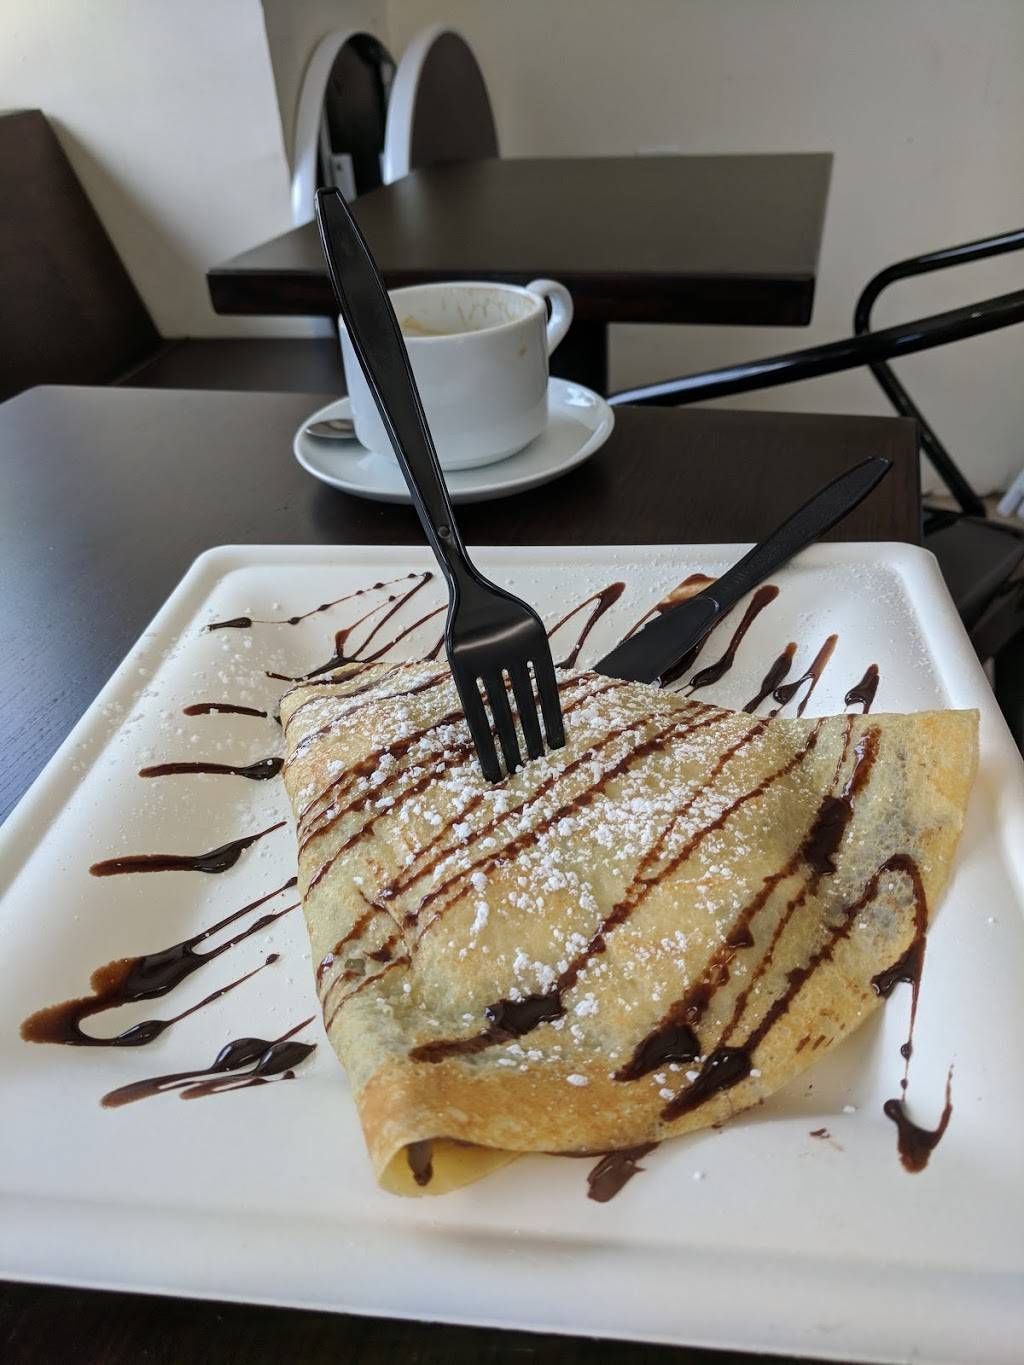 Two Crepes | cafe | 4301 Park Ave, Union City, NJ 07087, USA | 2014304399 OR +1 201-430-4399